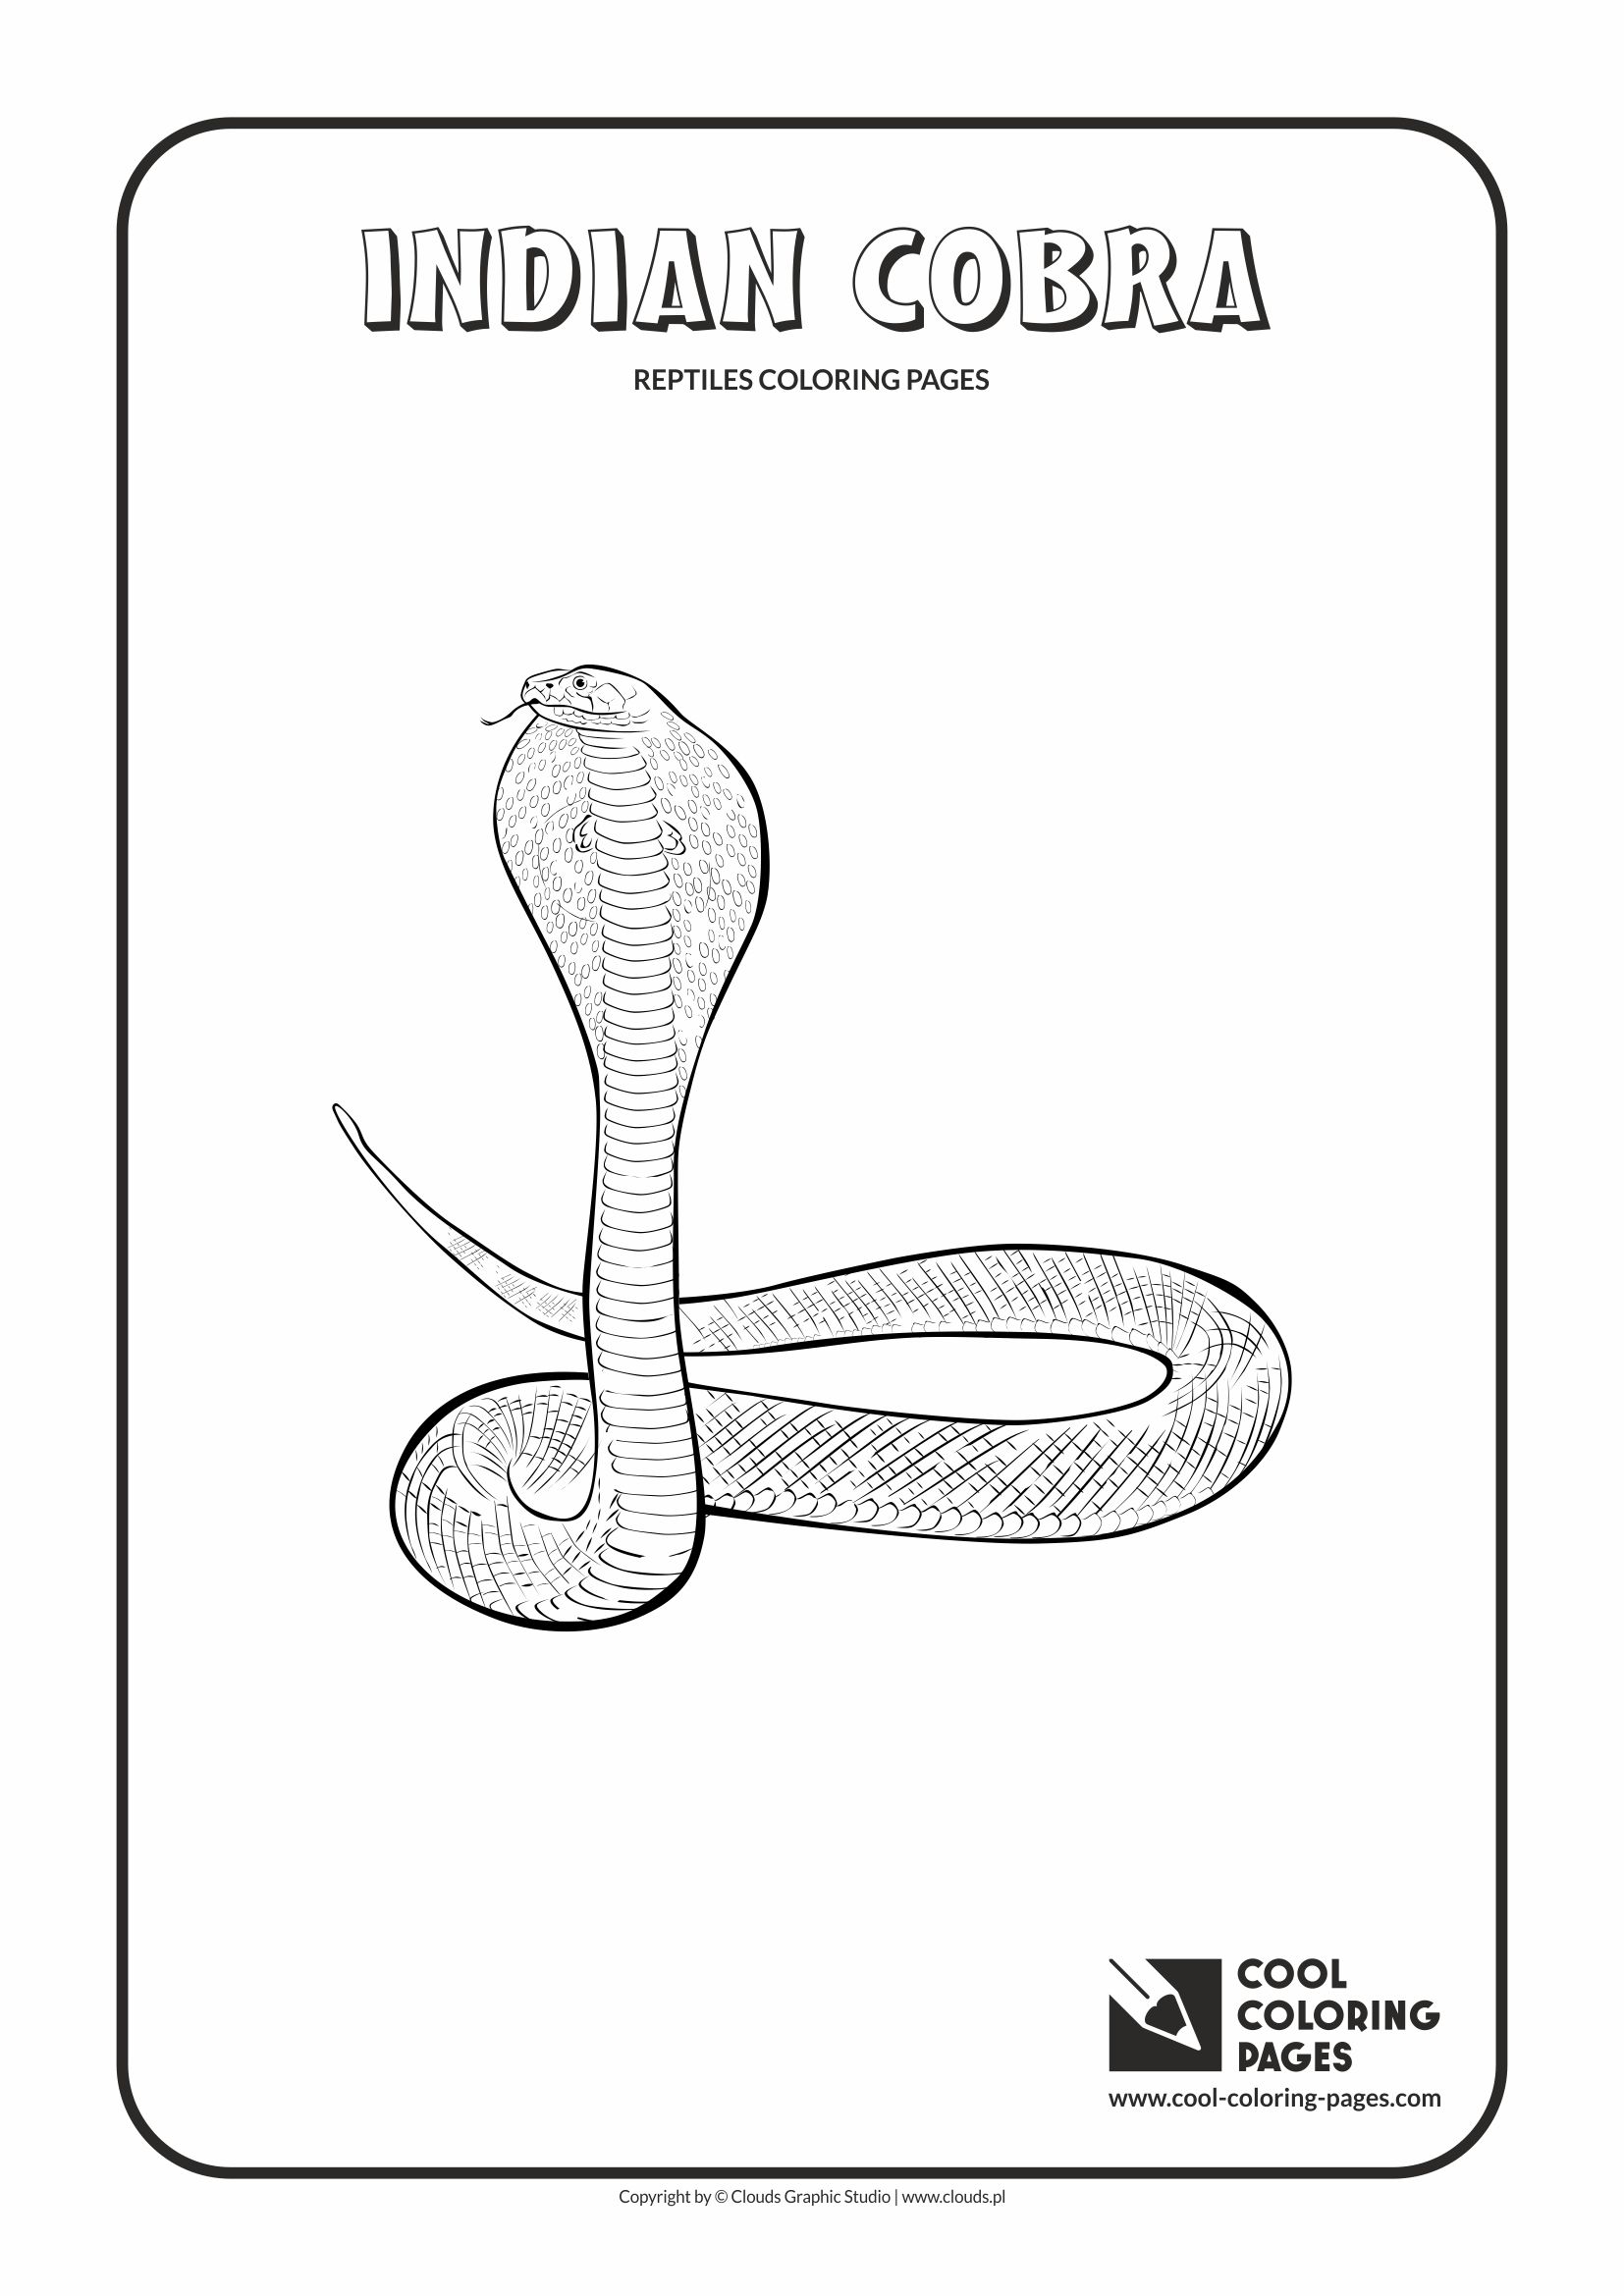 Cool Coloring Pages - Animals / Indian cobra / Coloring page with indian cobra